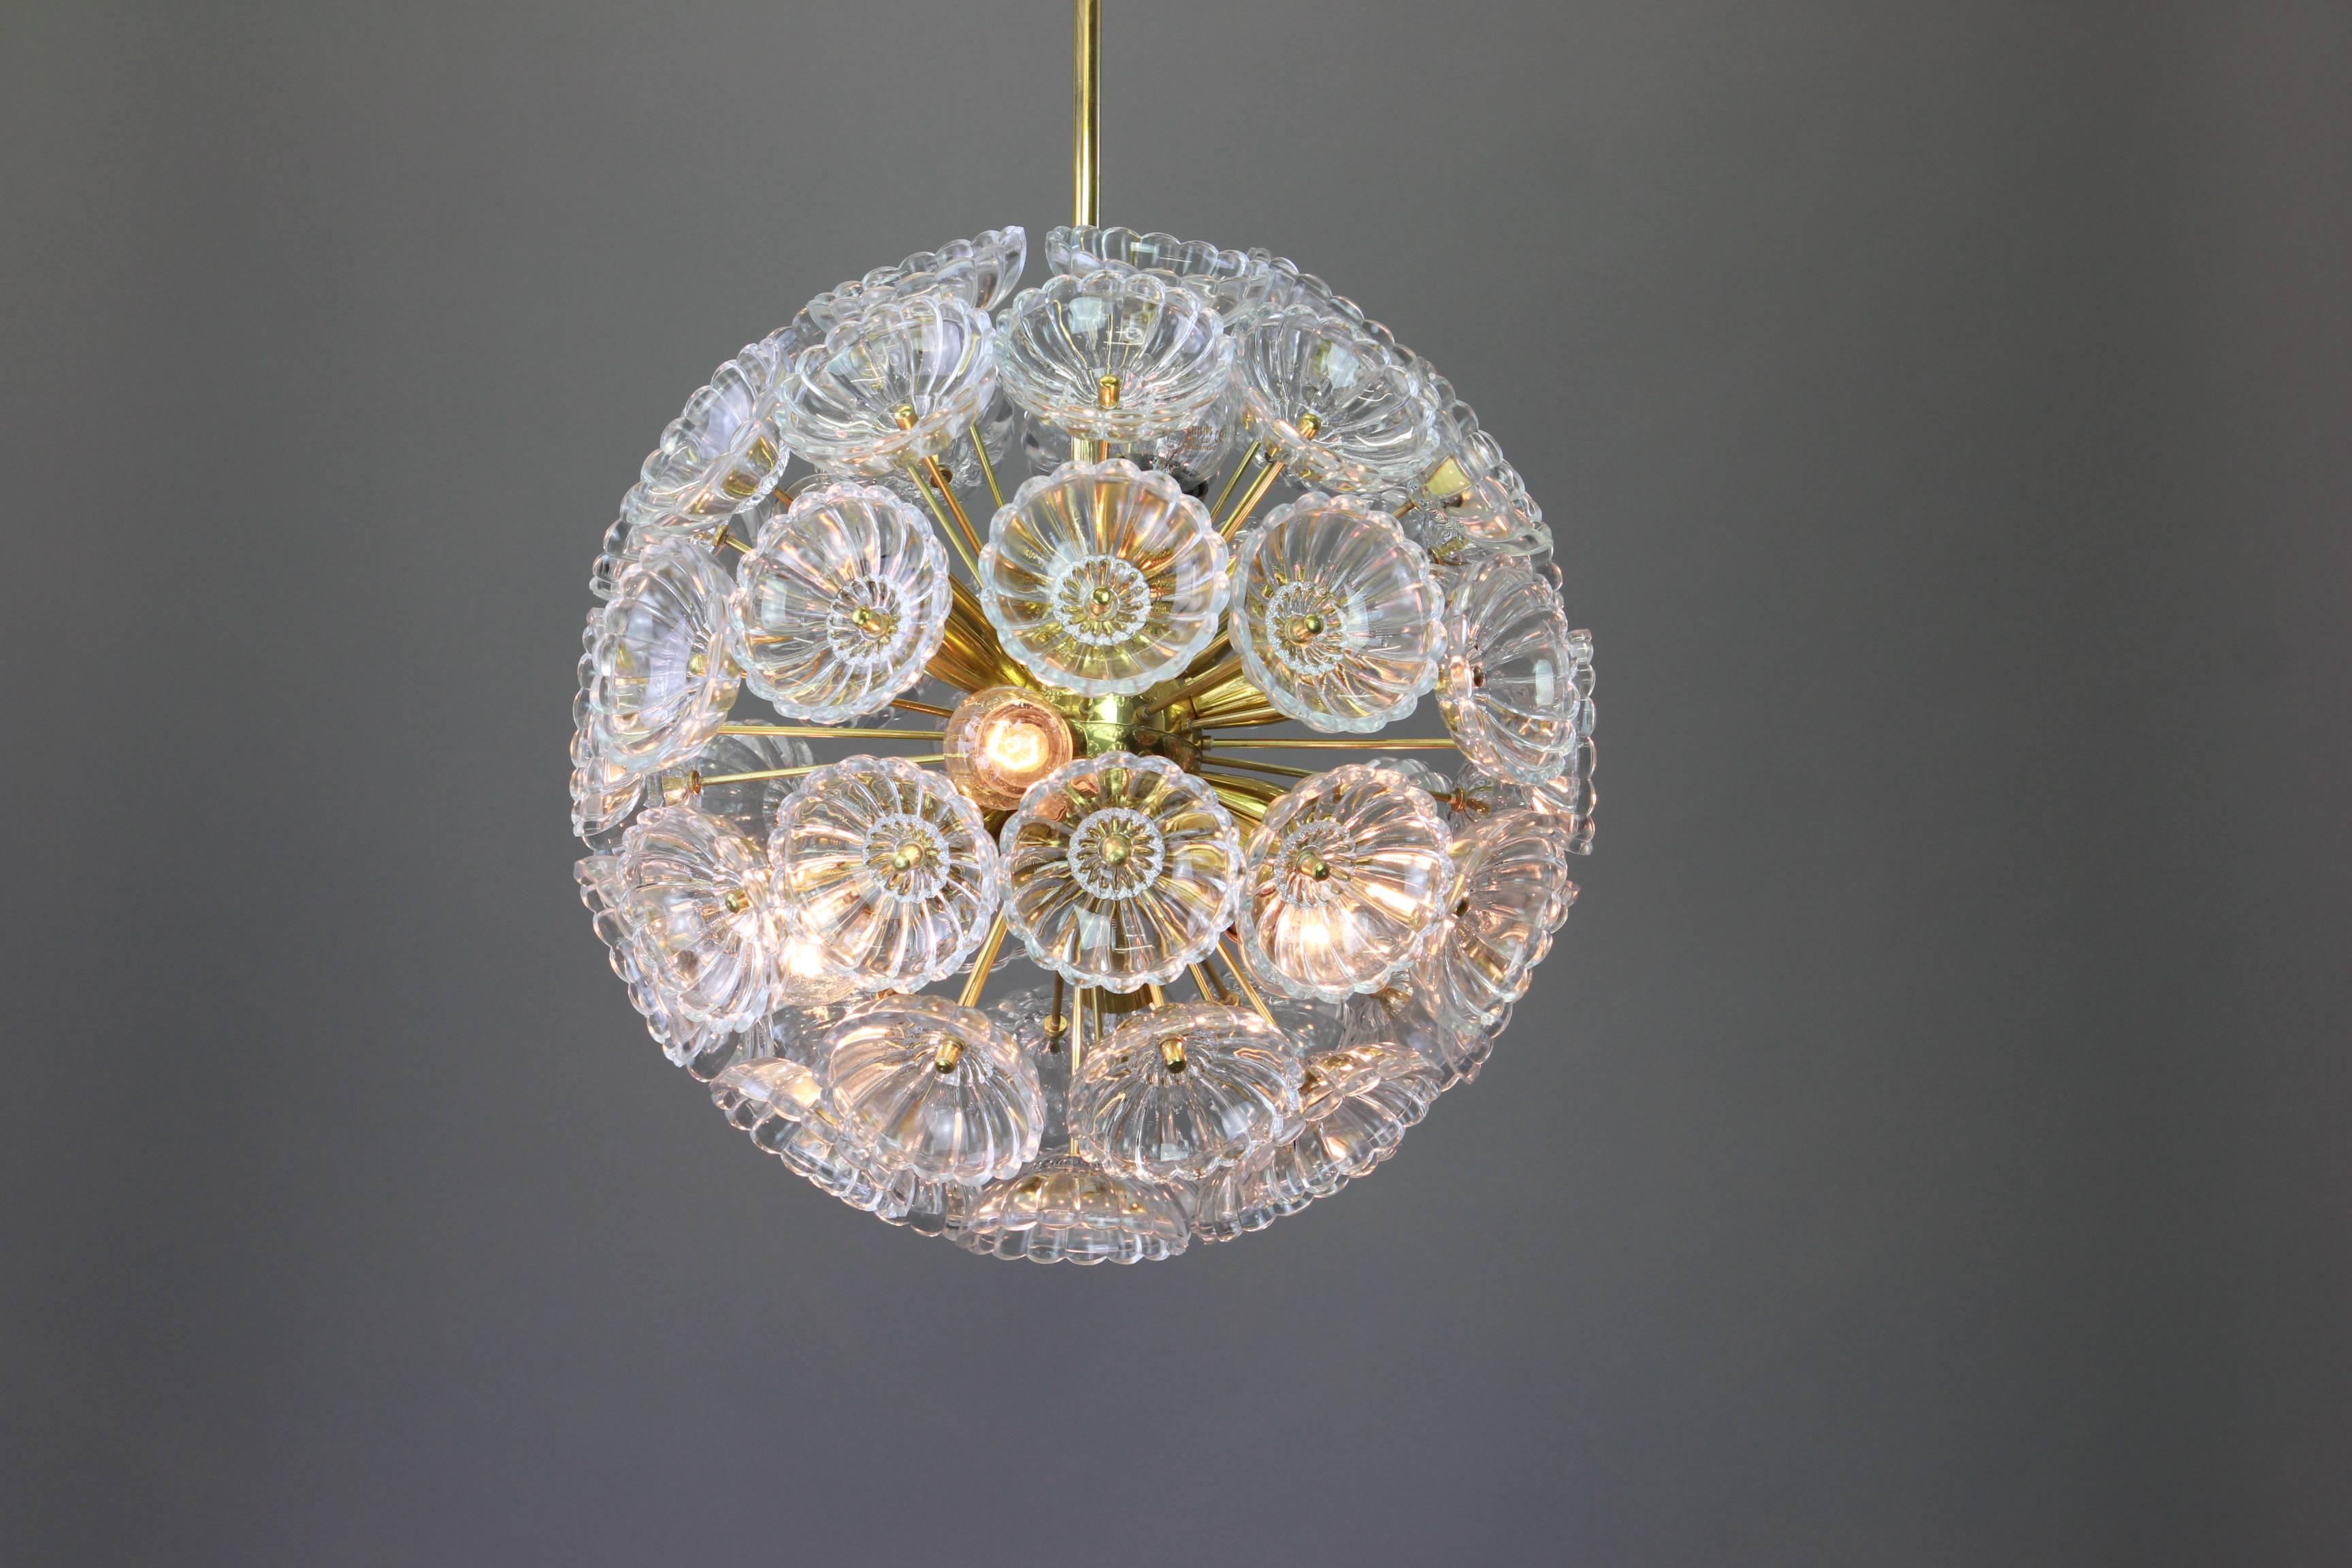 Mid-Century Modern 1 of 2 Stunning Floral Glass and Brass Sputnik Chandeliers, Germany, 1960s For Sale